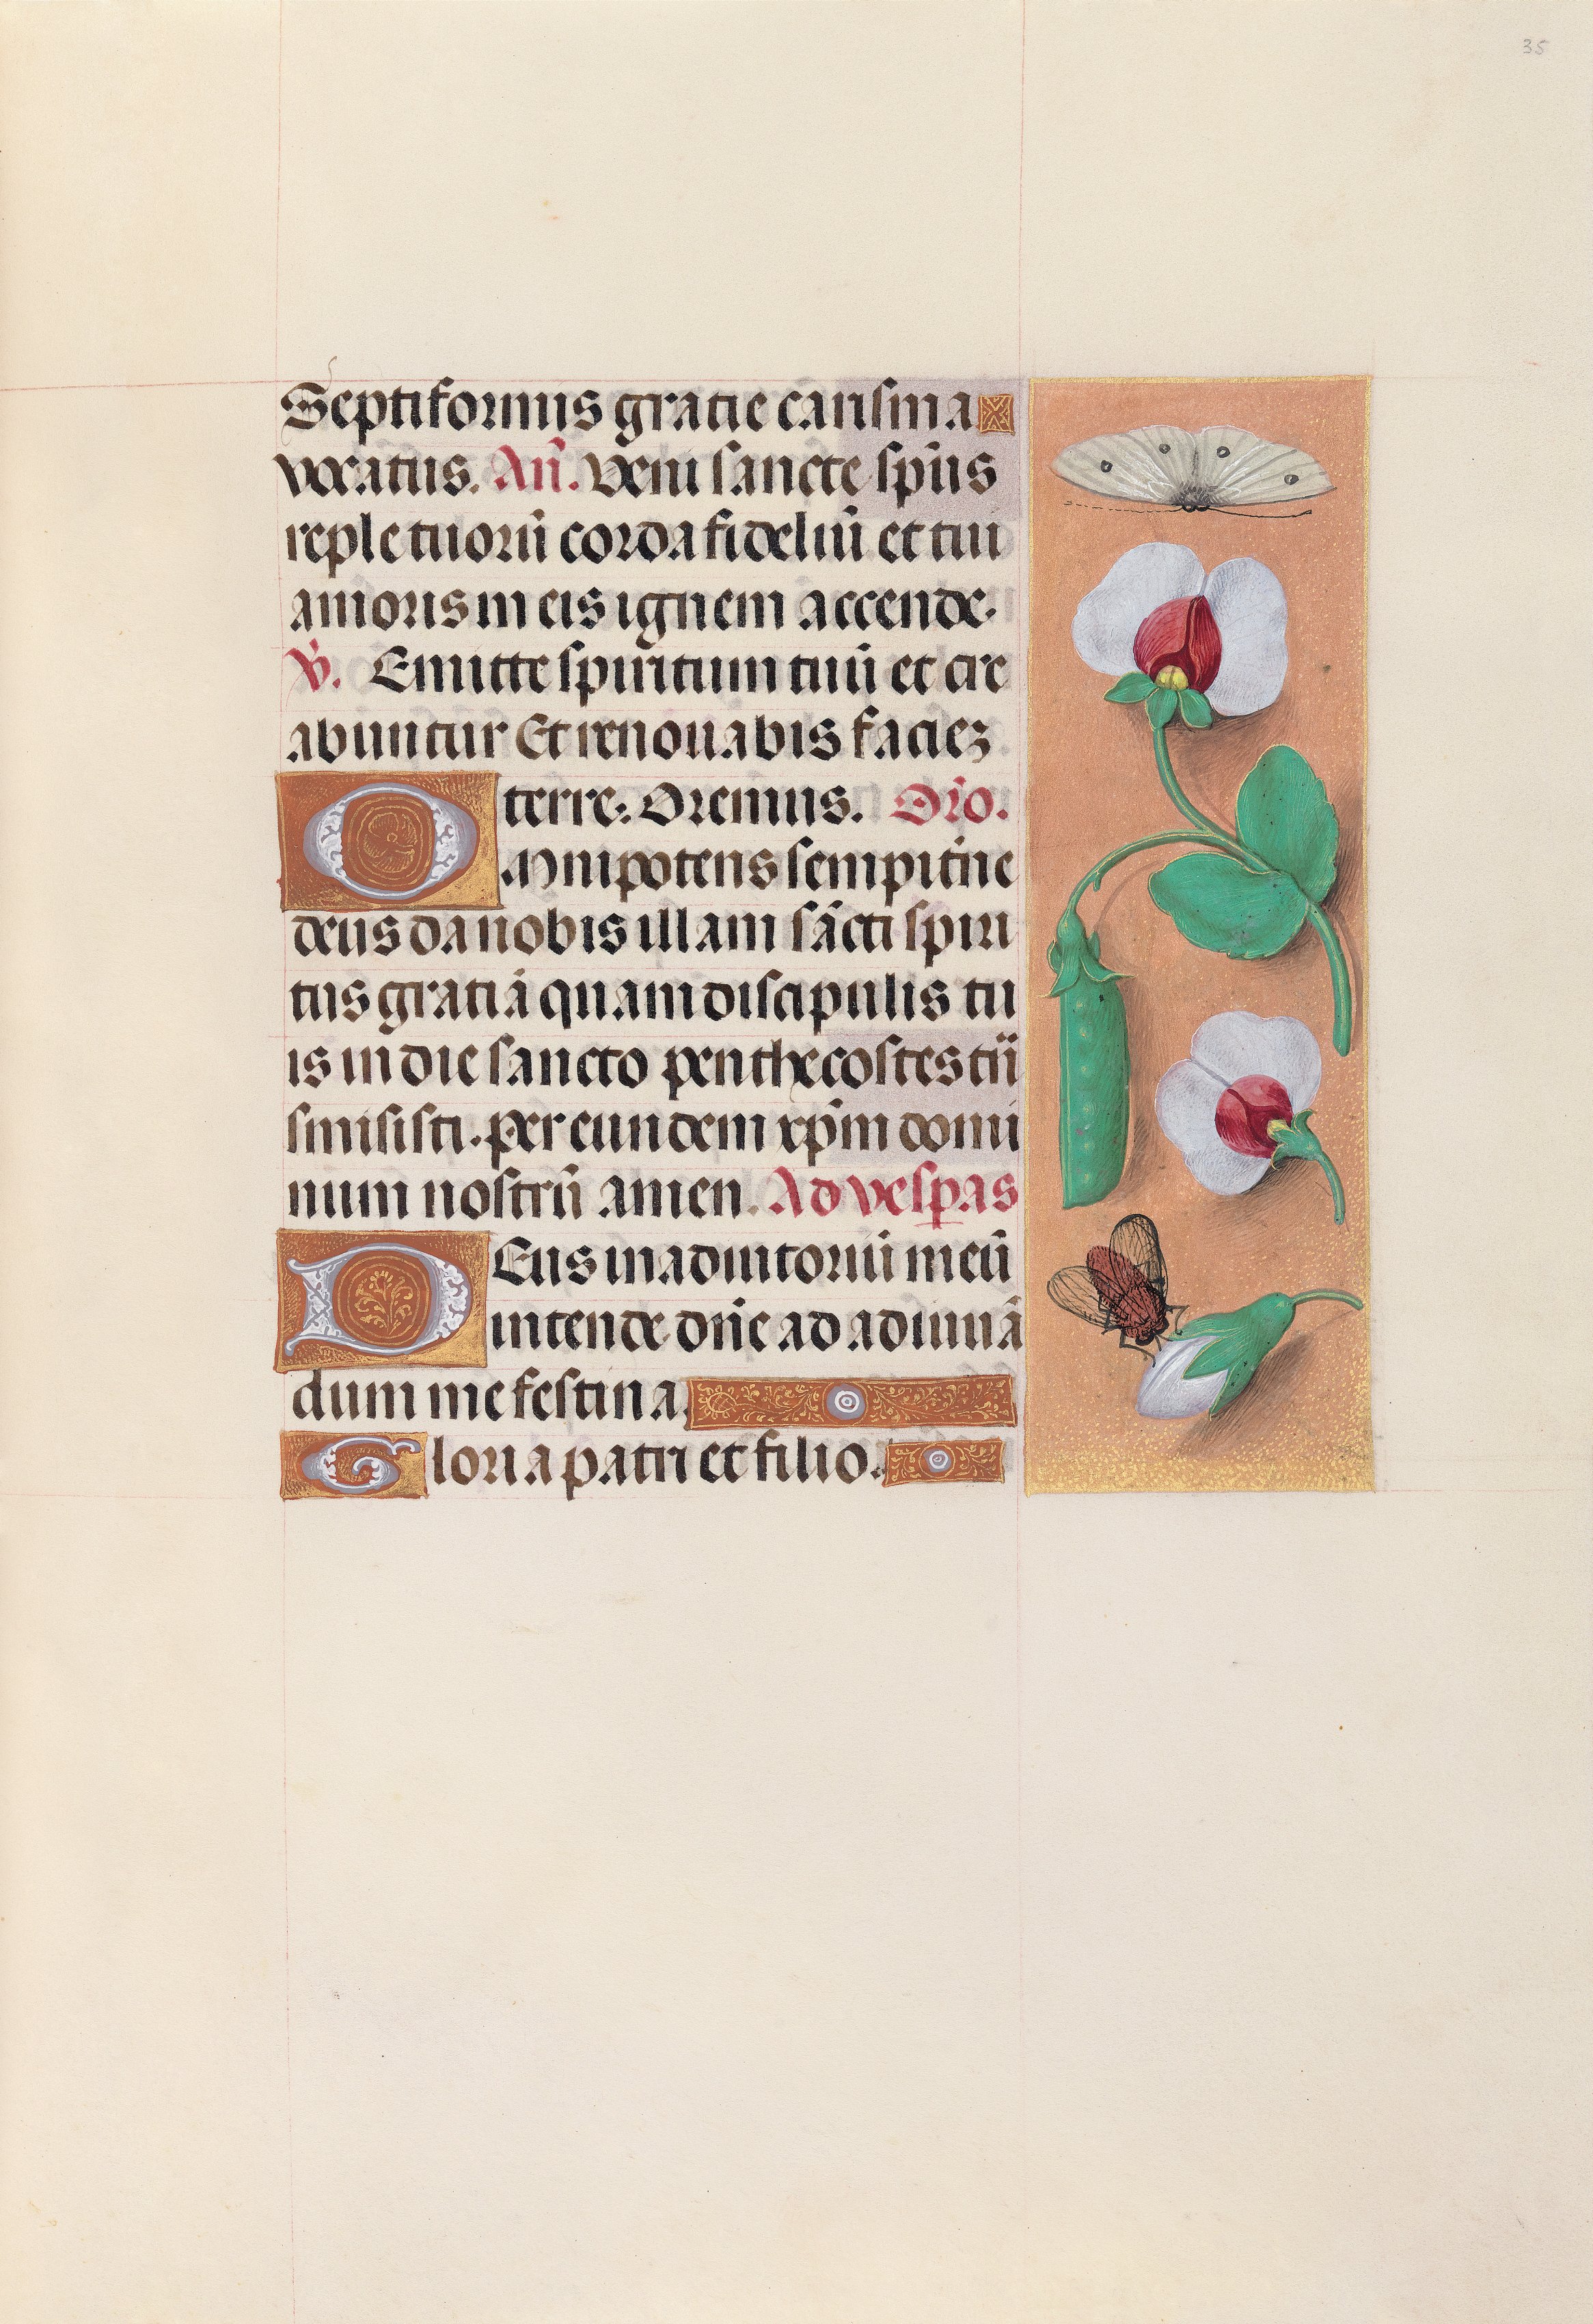 Hours of Queen Isabella the Catholic, Queen of Spain:  Fol. 35r